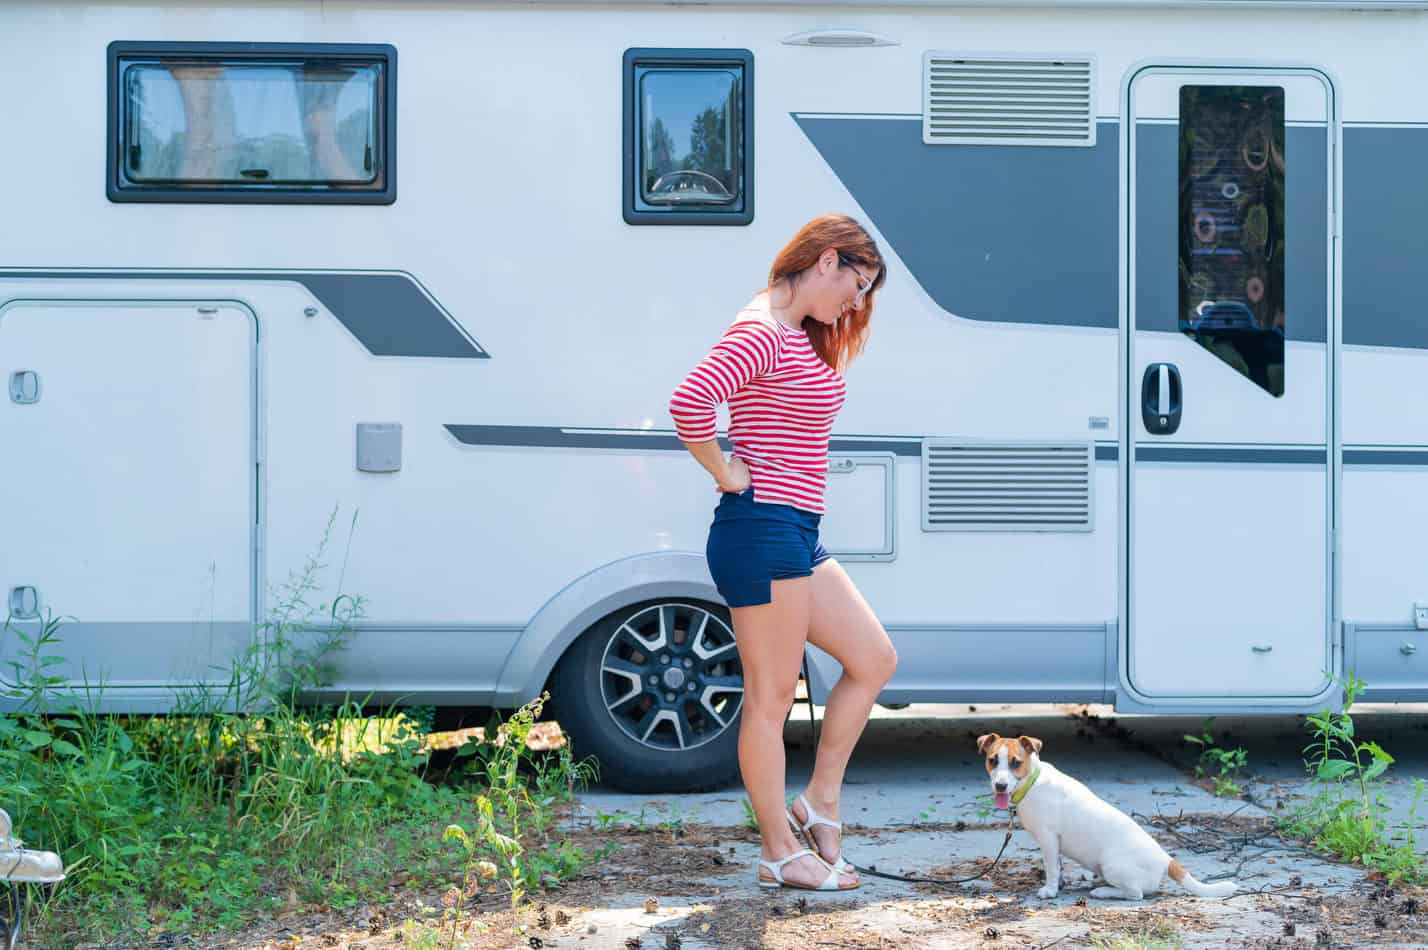 Girl trains dog in front of an RV